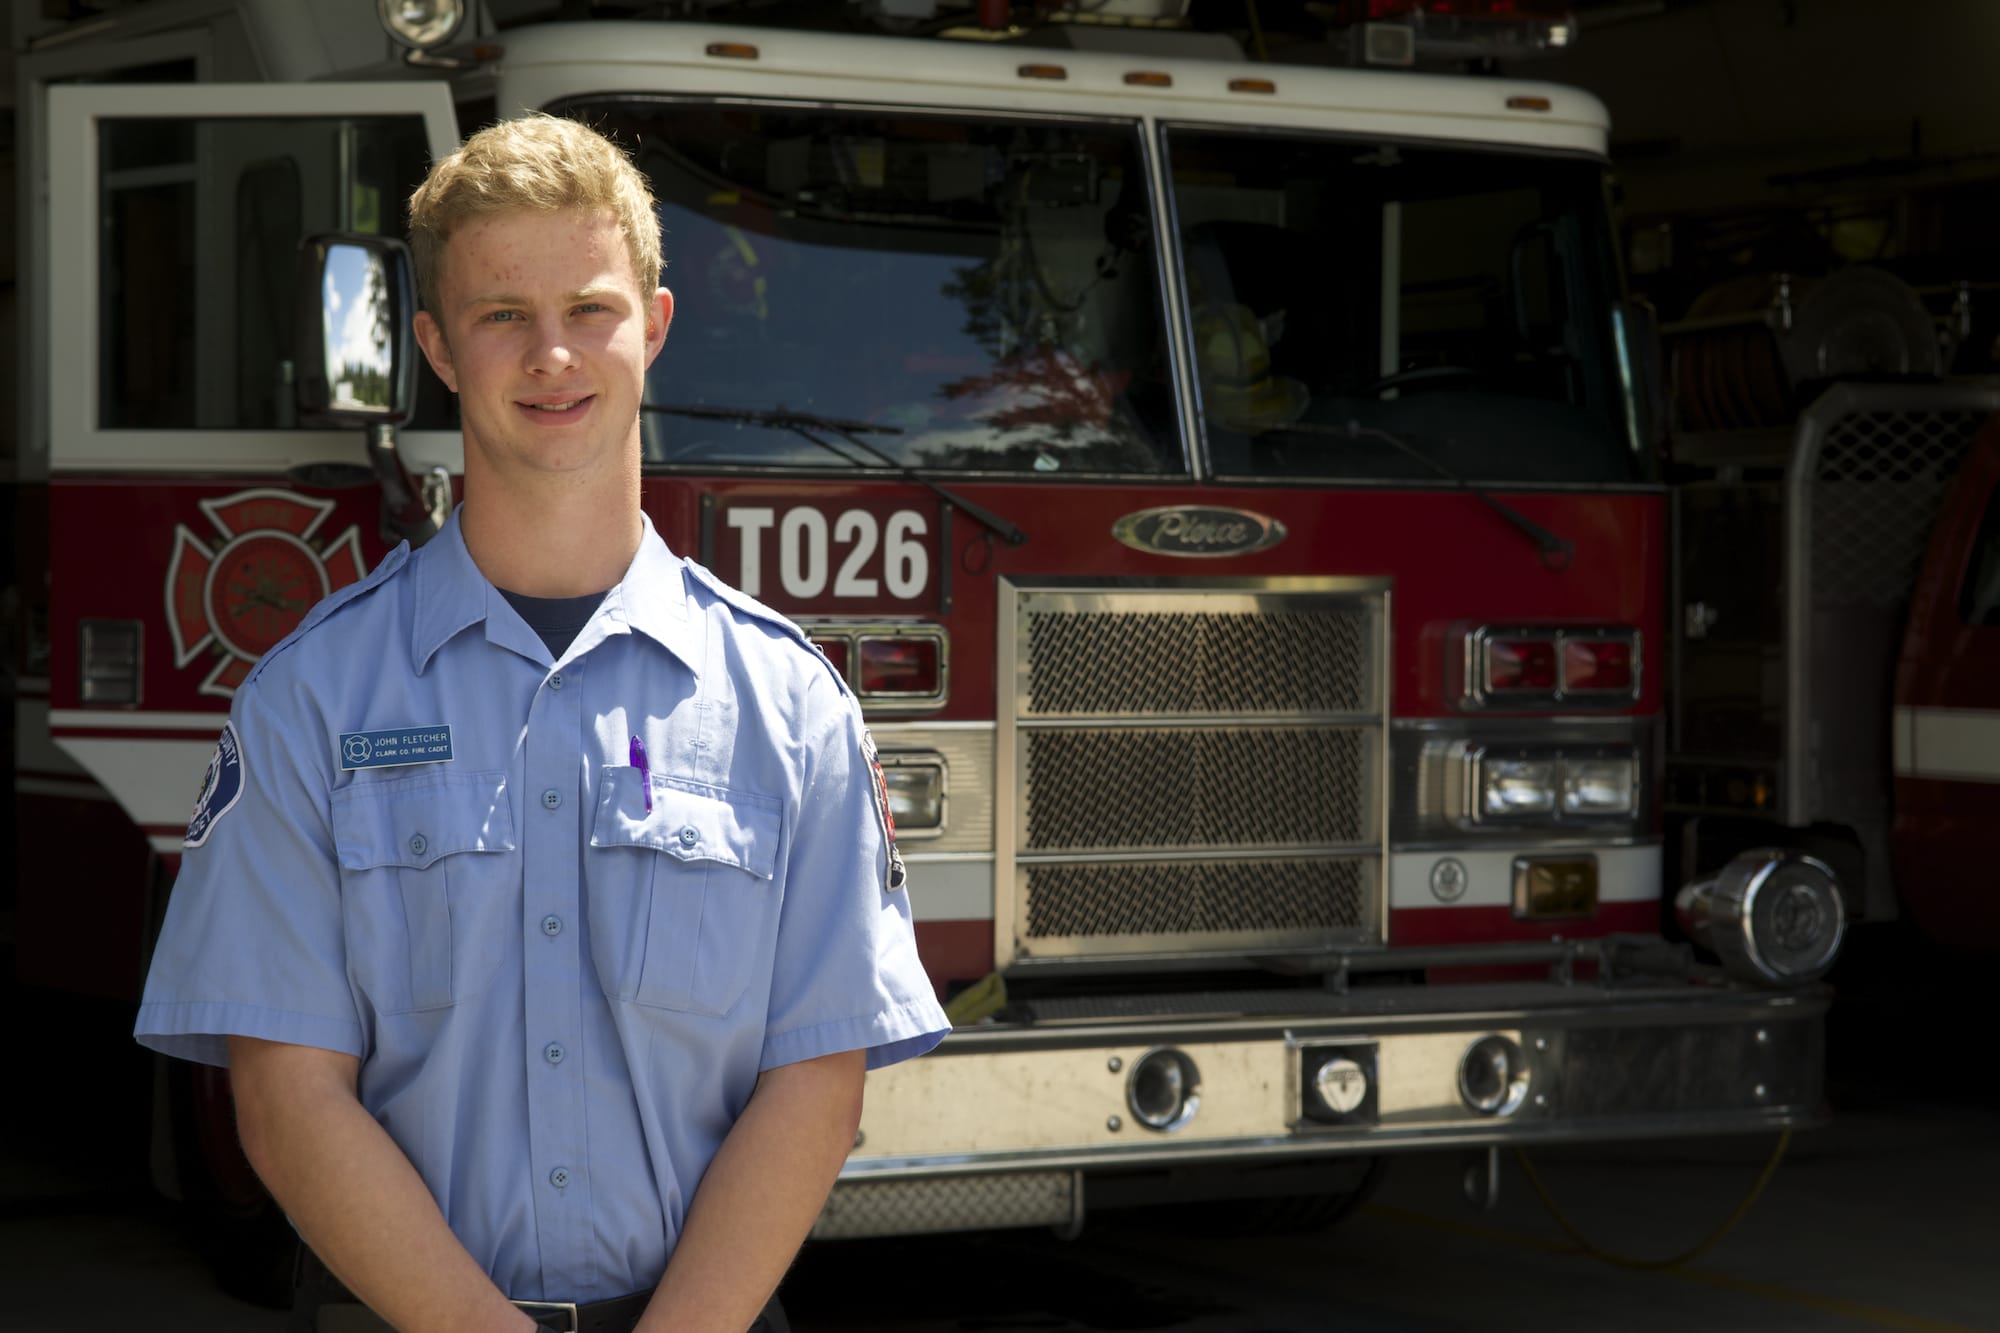 Jack Fletcher, a senior at Prairie High School, is the chief fire cadet at Clark County Fire &amp; Rescue Station 26 in Battle Ground. Four days after graduation, he'll drive to Prineville, Ore.